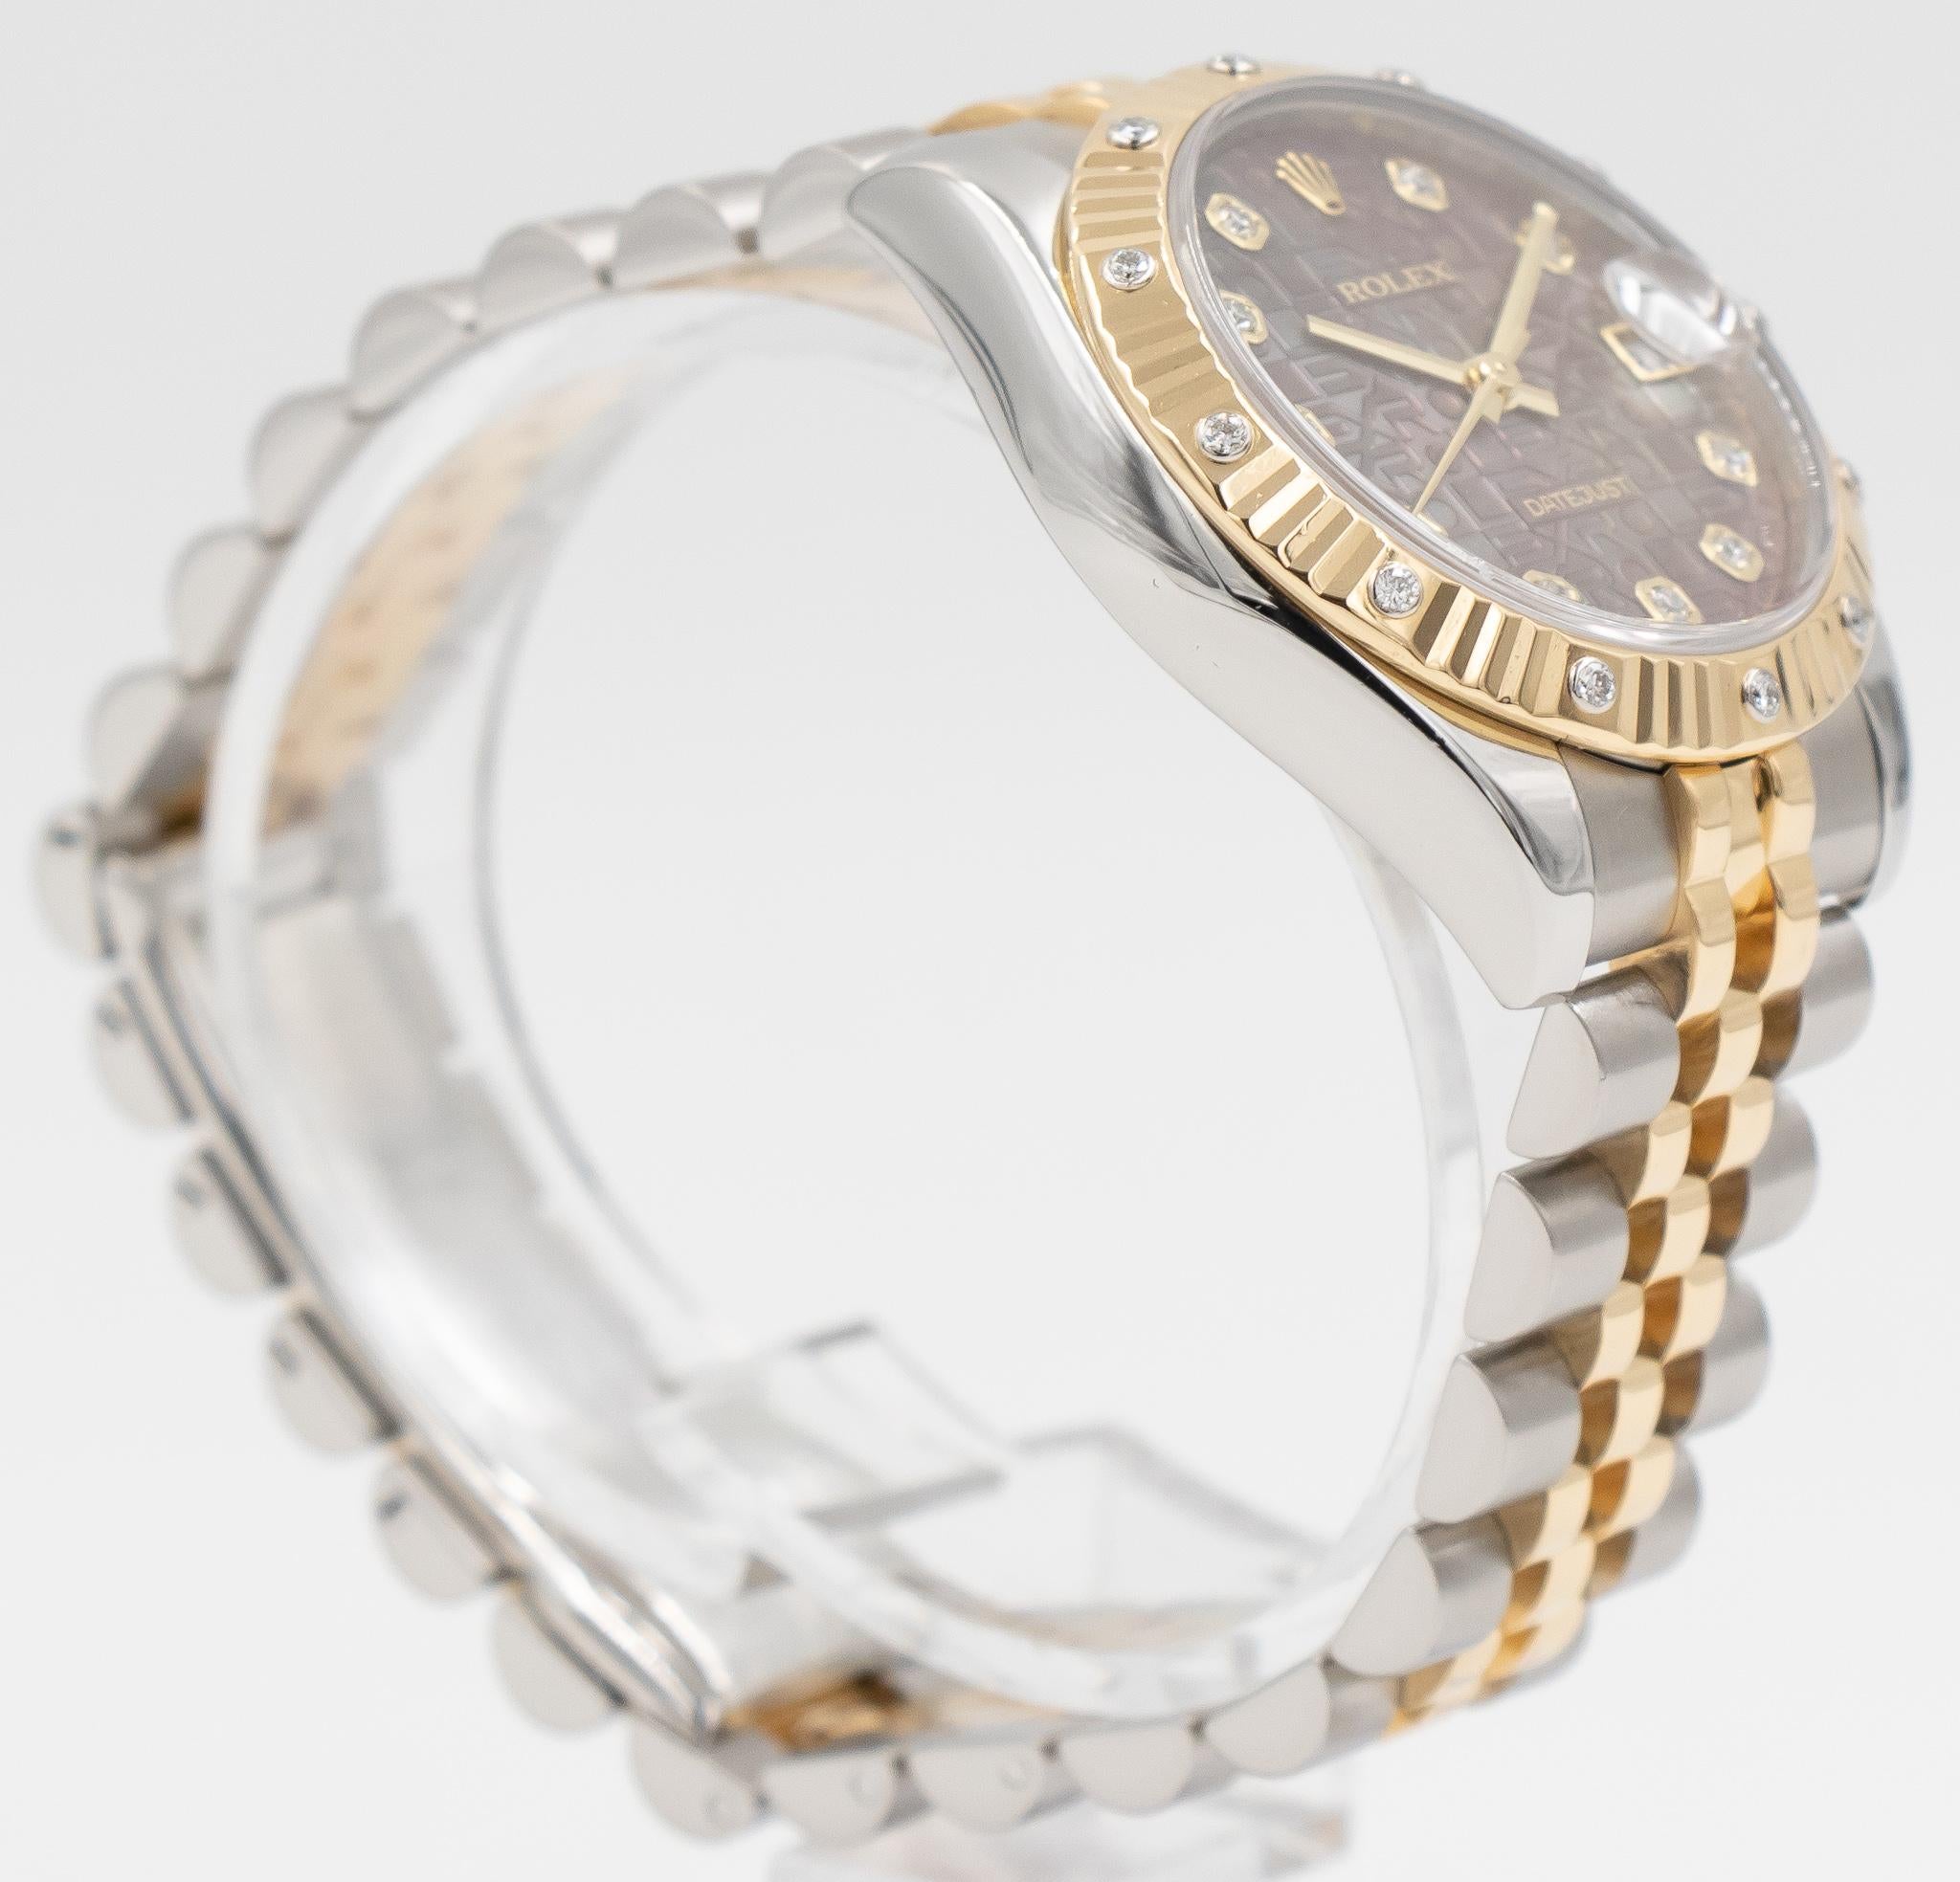 This beautiful ladies DateJust watch came to our store as a trade and does not come with box or papers. This watch features a 31mm stainless steel case, a fluted 18k yellow gold gem-set bezel, and a stunning black mother-of-pearl Rolex dial with